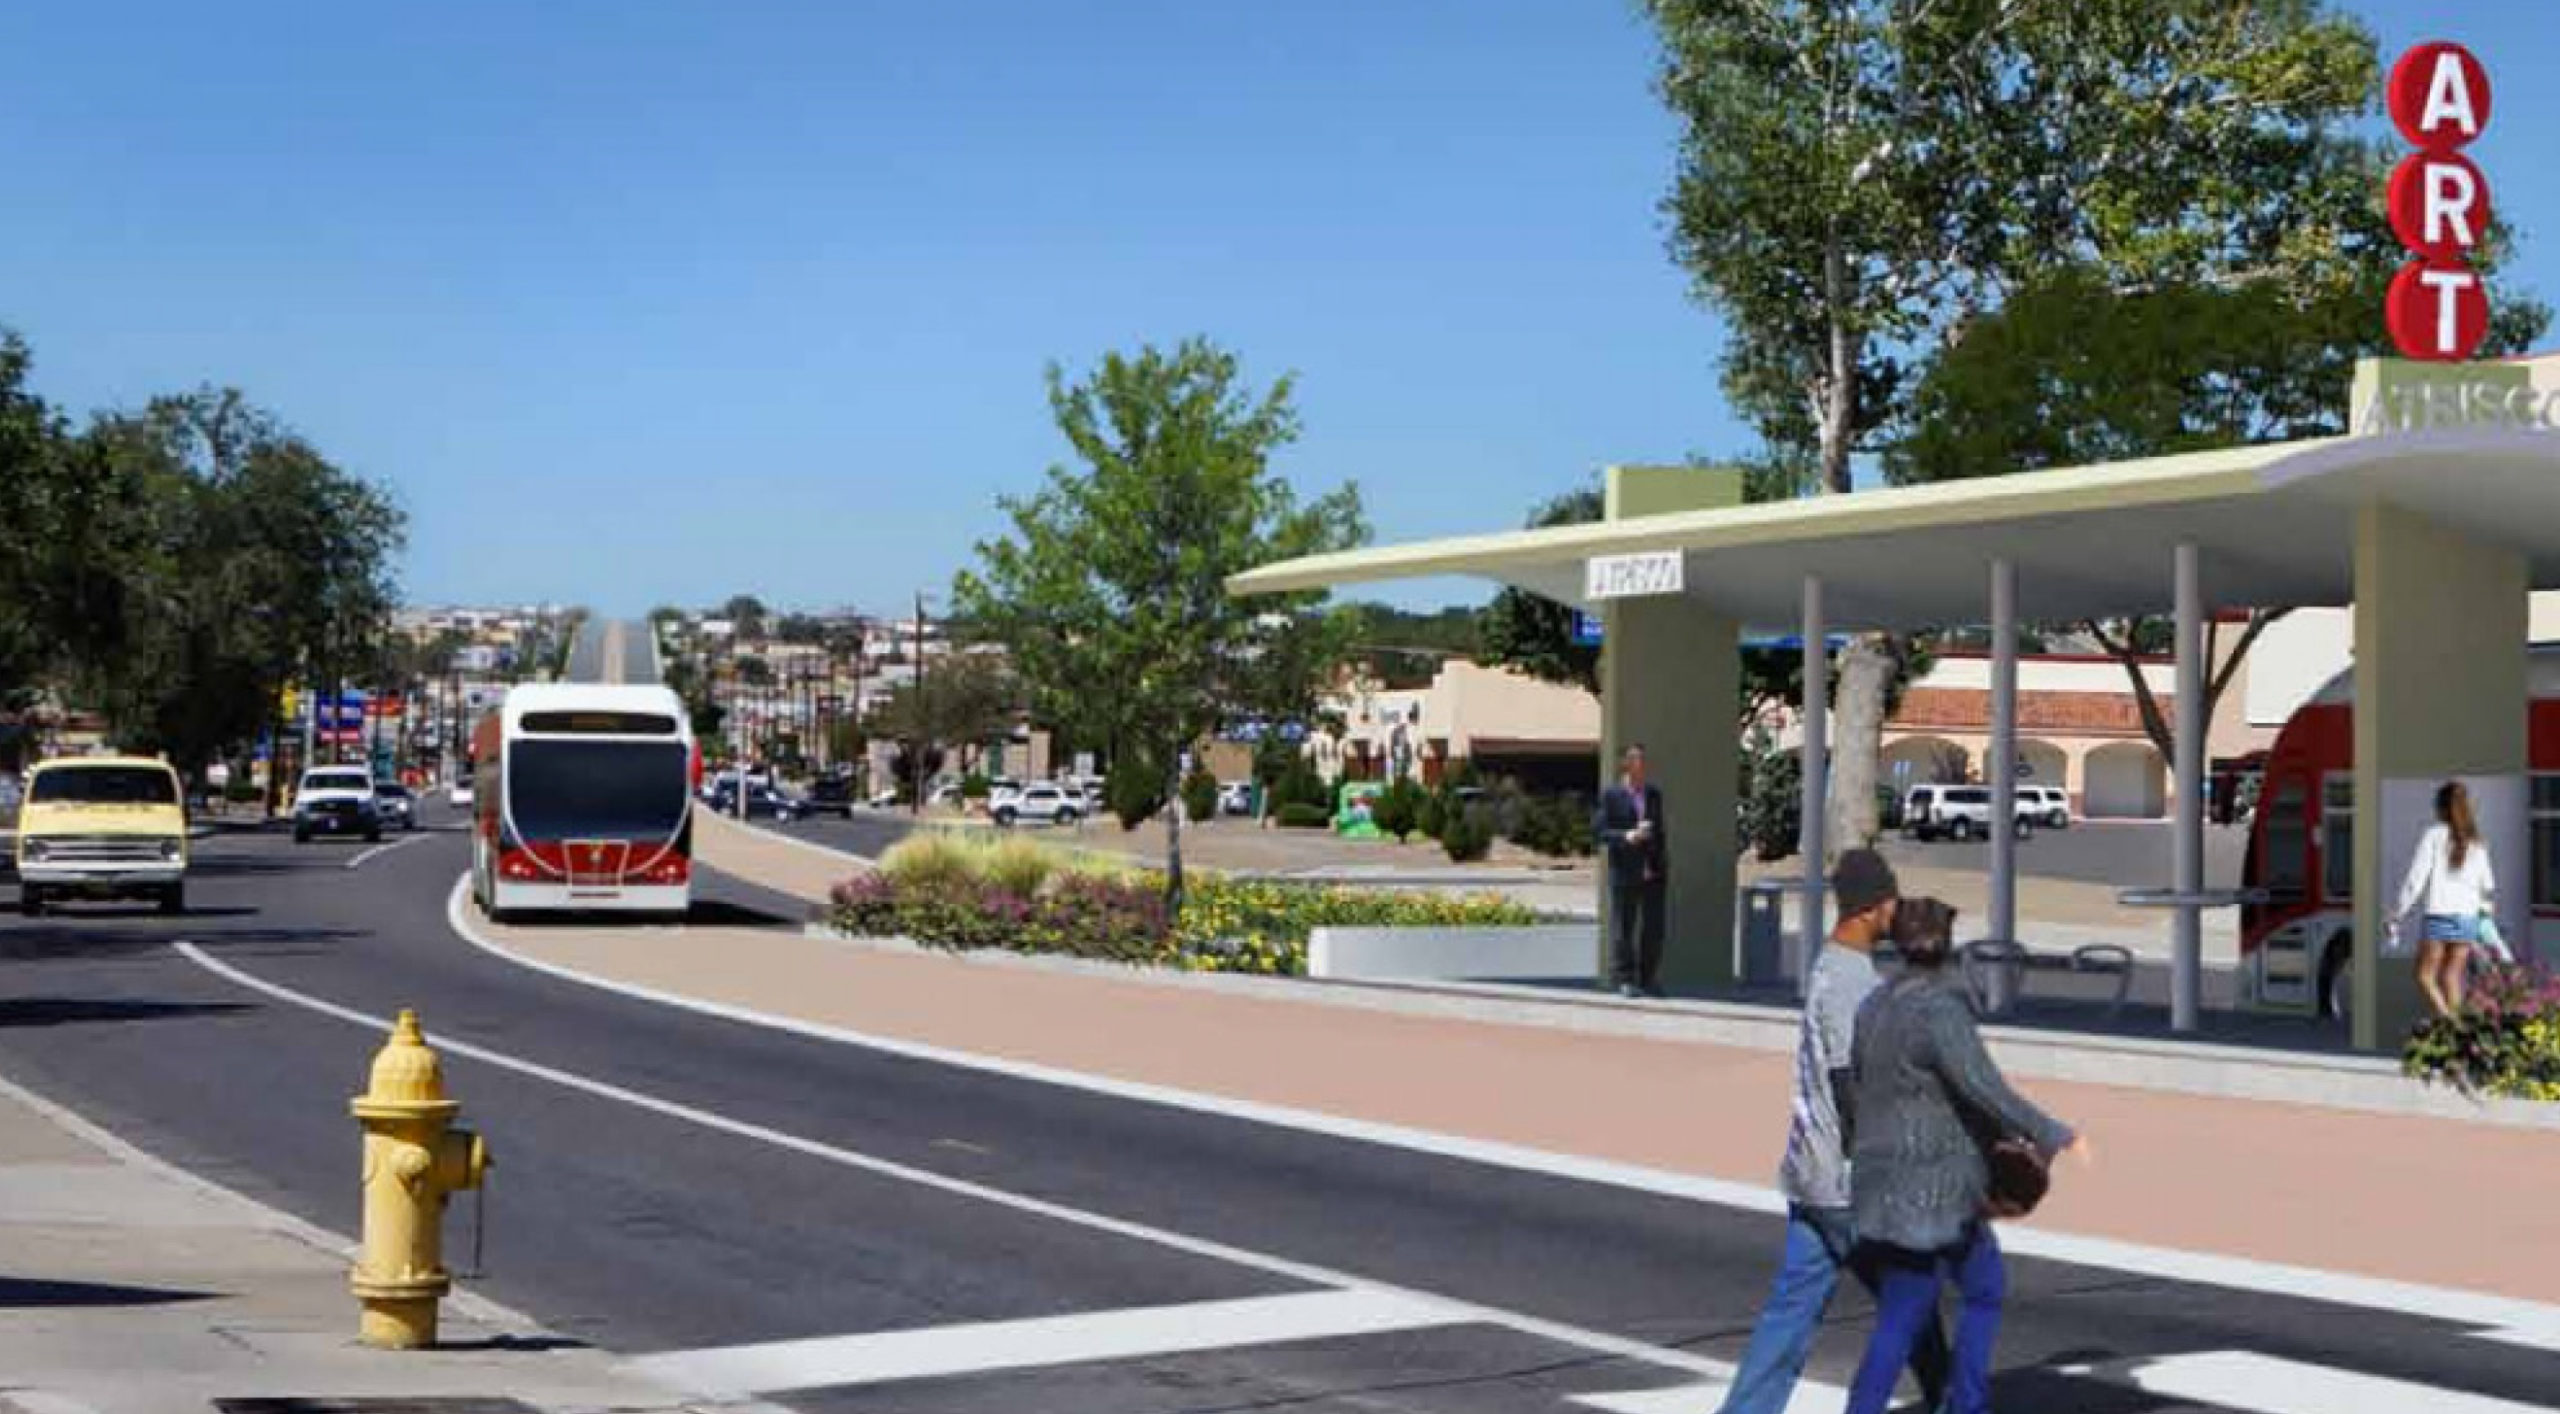 TOD: Analyzing Proposed Zoning Changes Bordering a New Transit Line